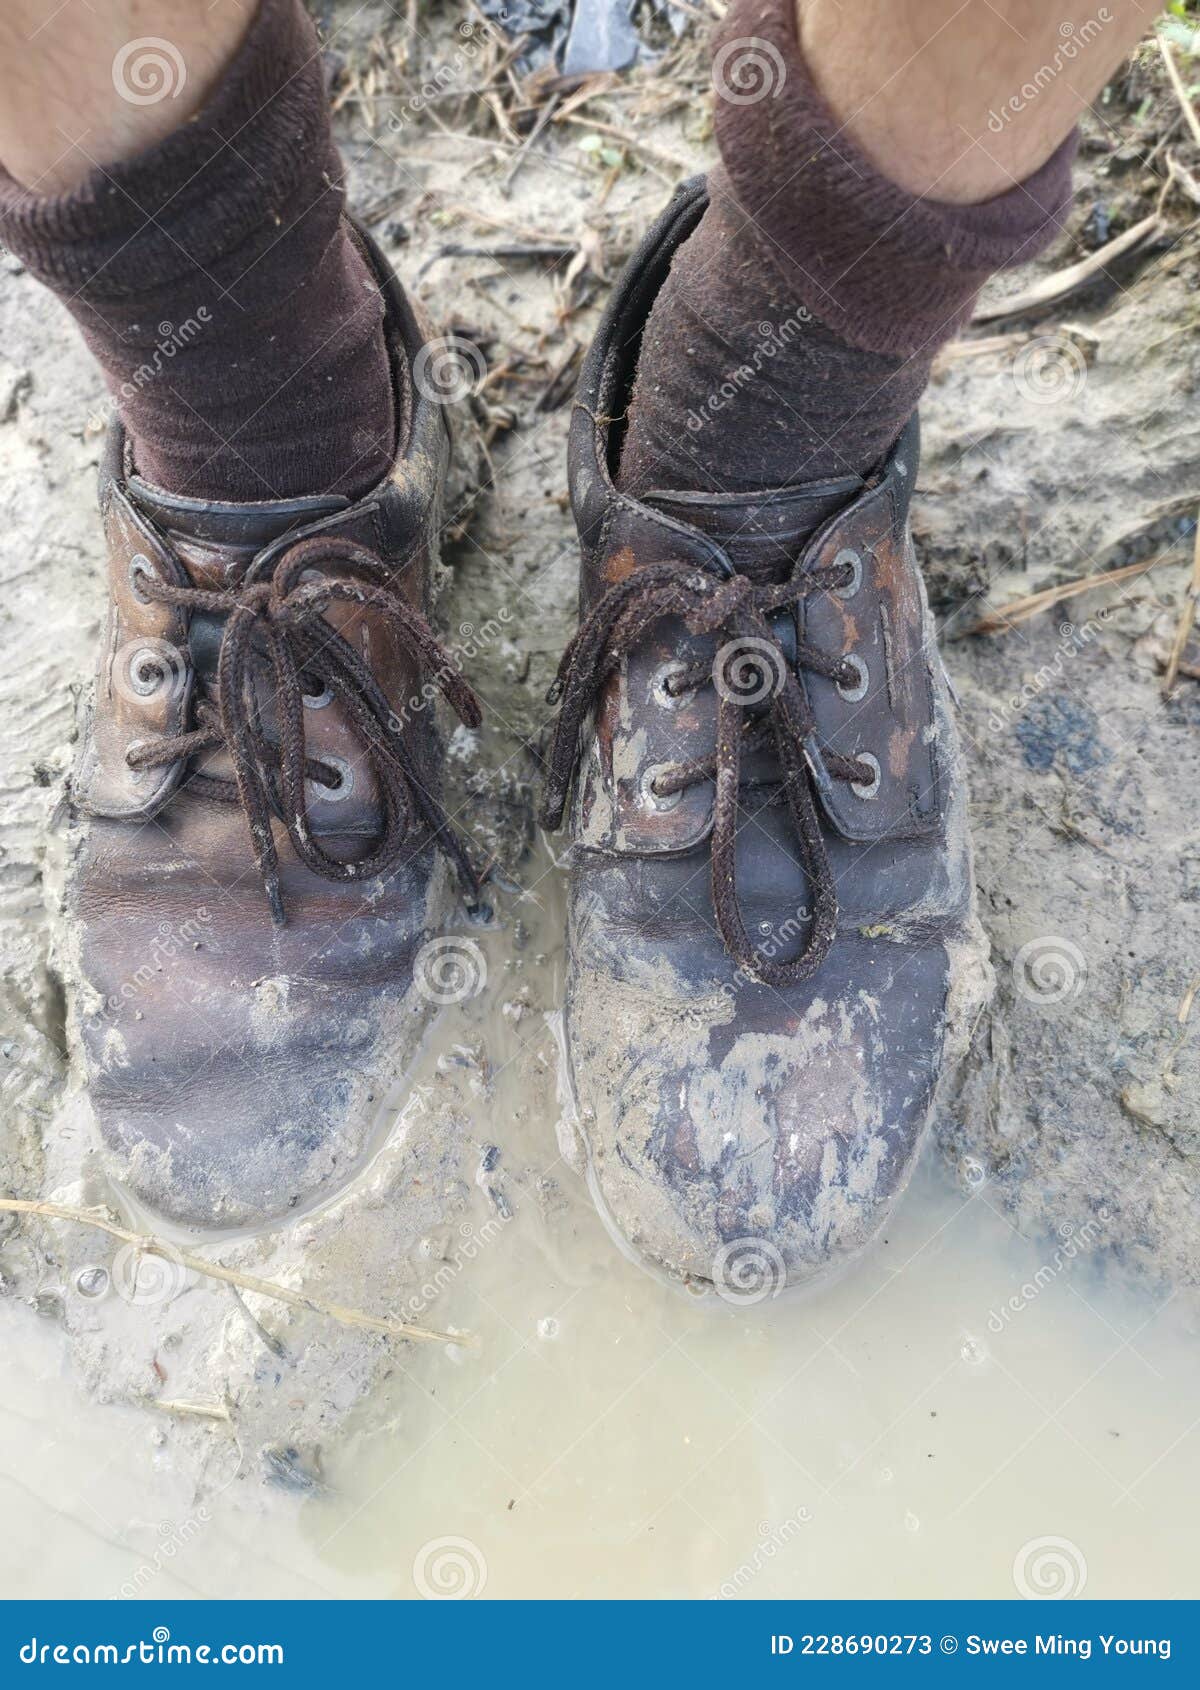 Old Shoe Stick with Mud from the Swampy Ground Stock Image - Image of ...